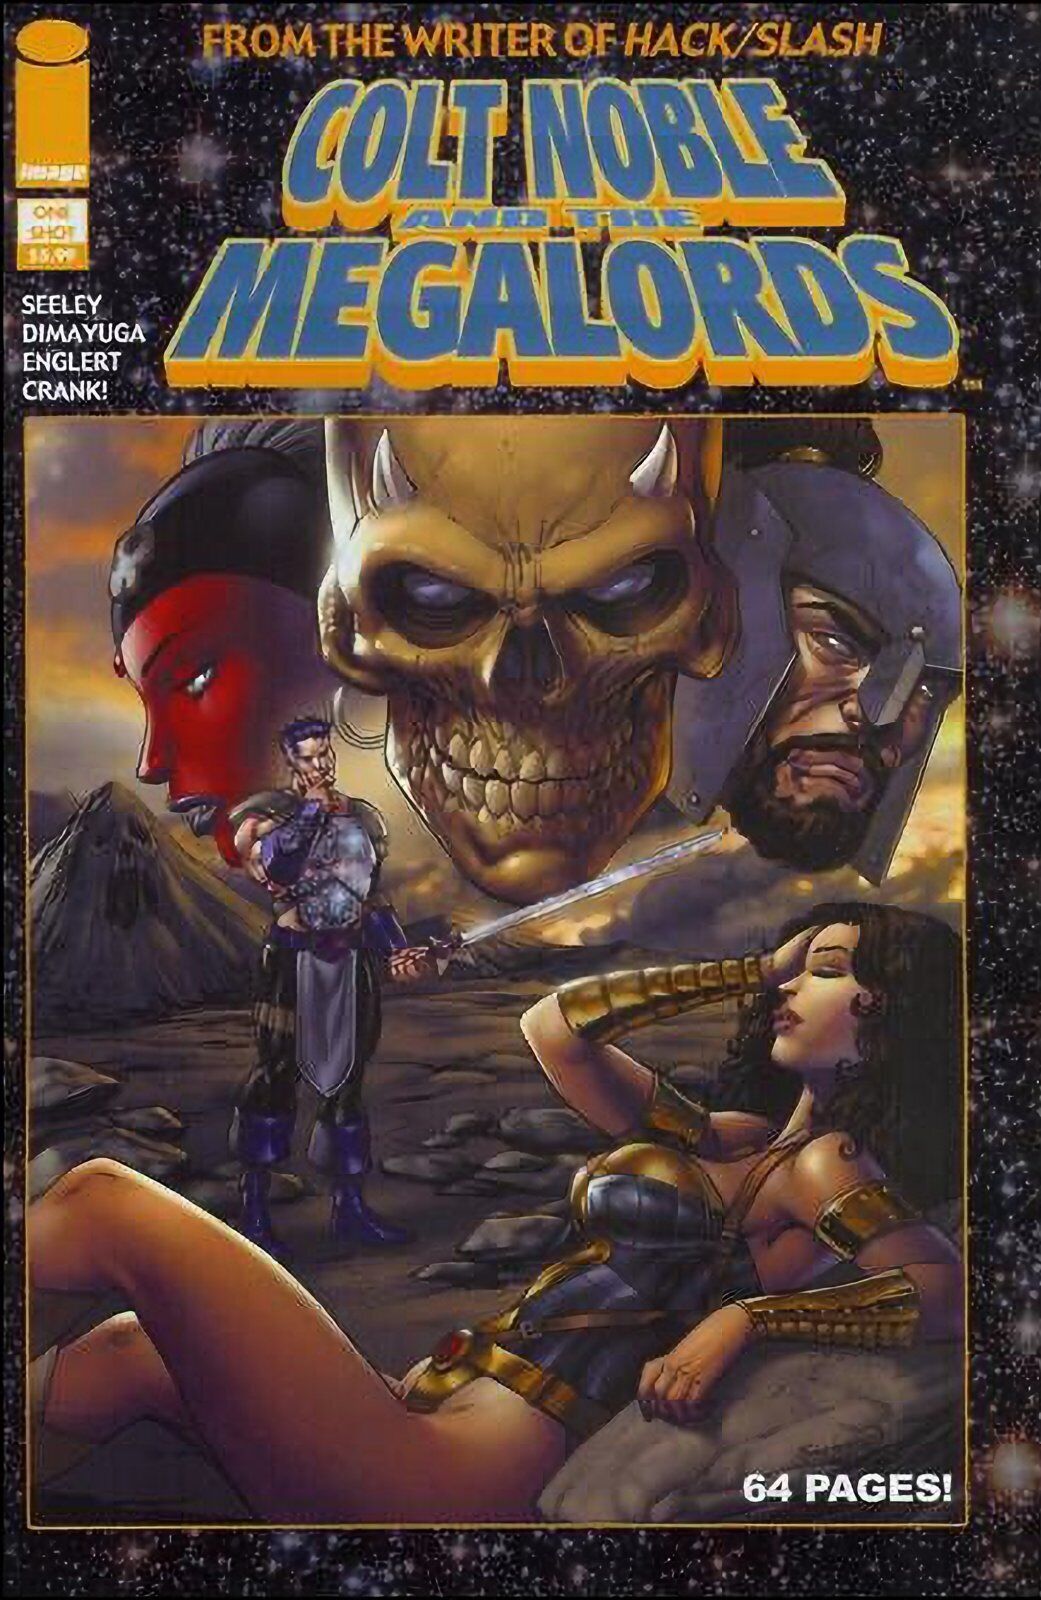 Colt Noble and the Megalords #1 (2010) Image Comics